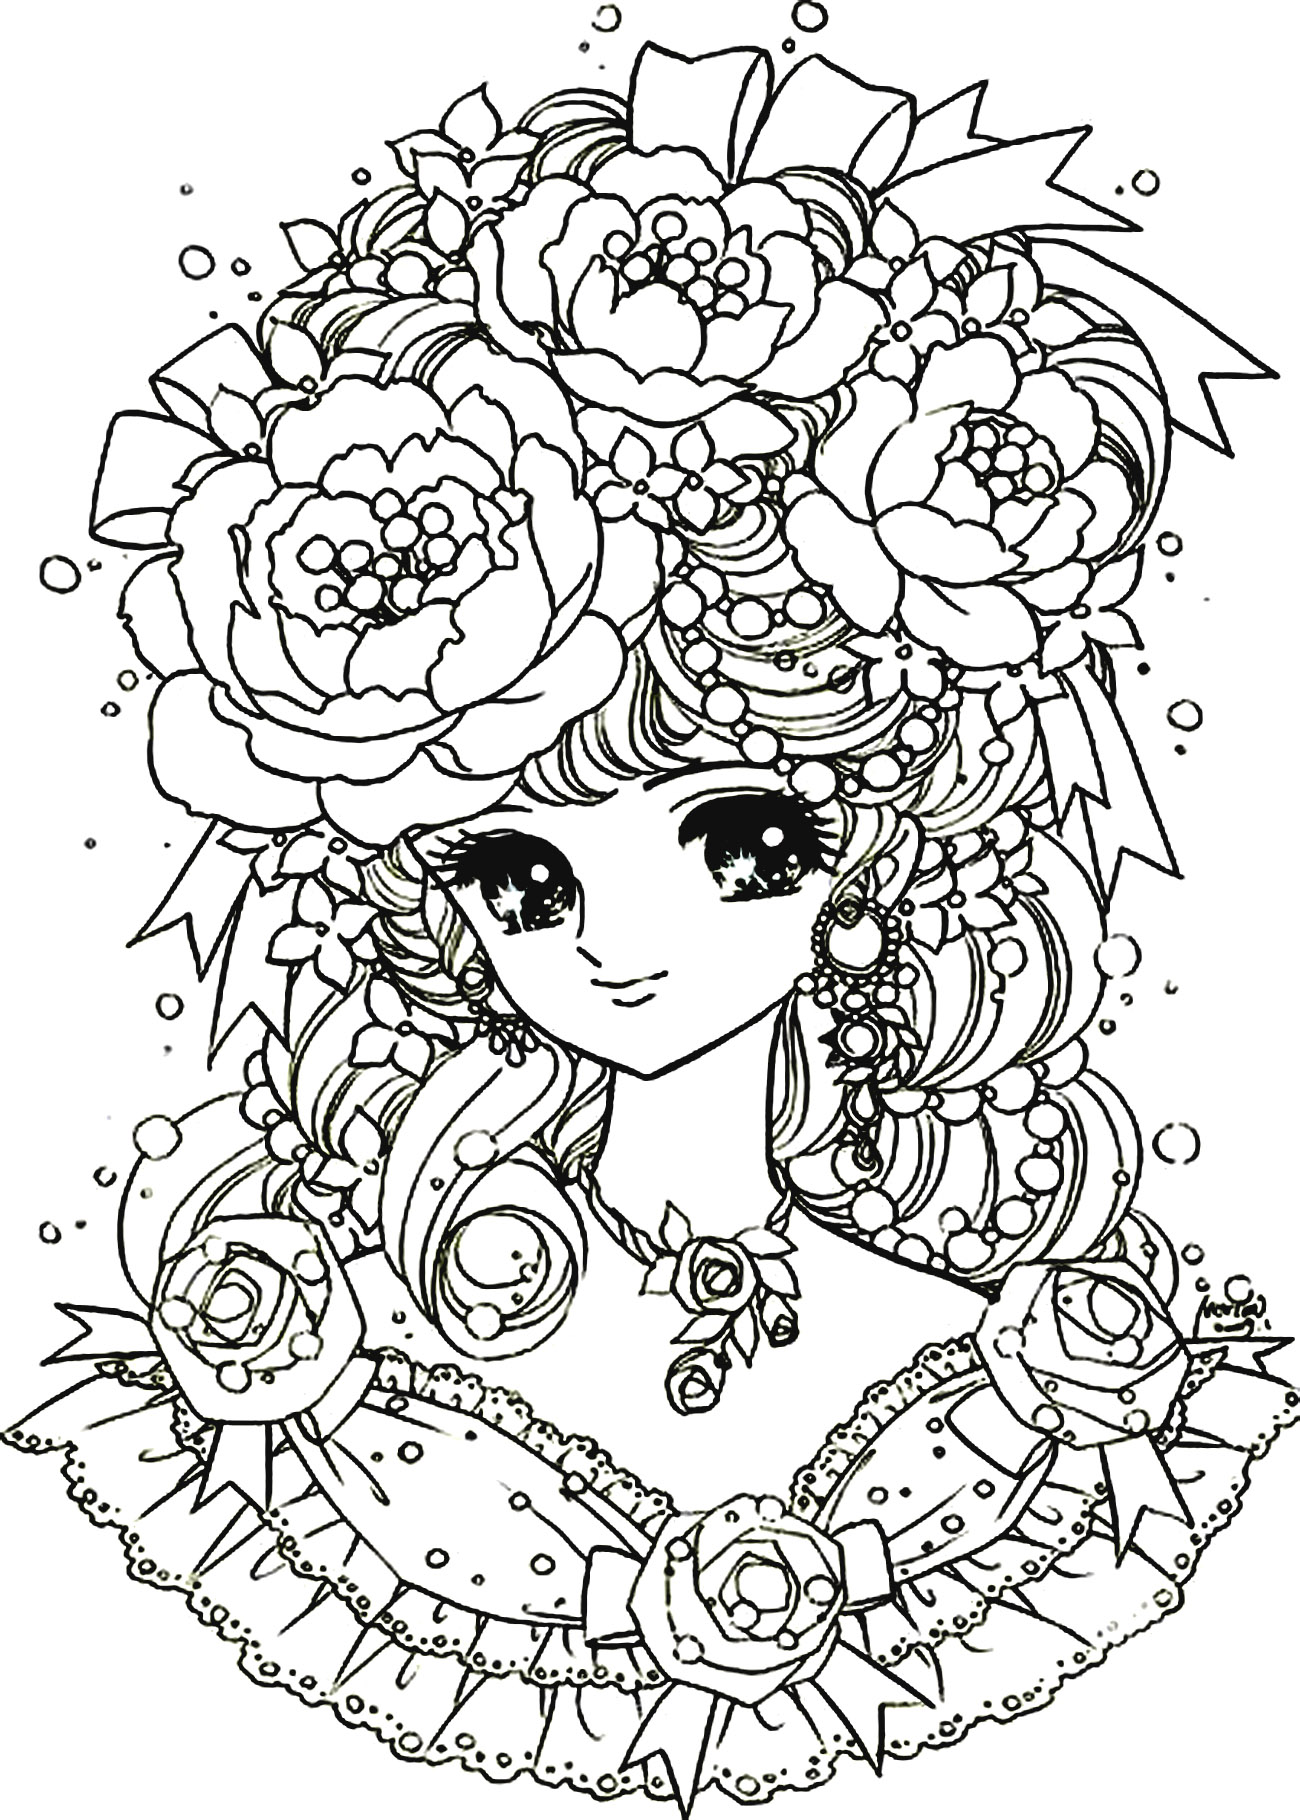 Depression Coloring Pages At Getcolorings.com | Free Printable